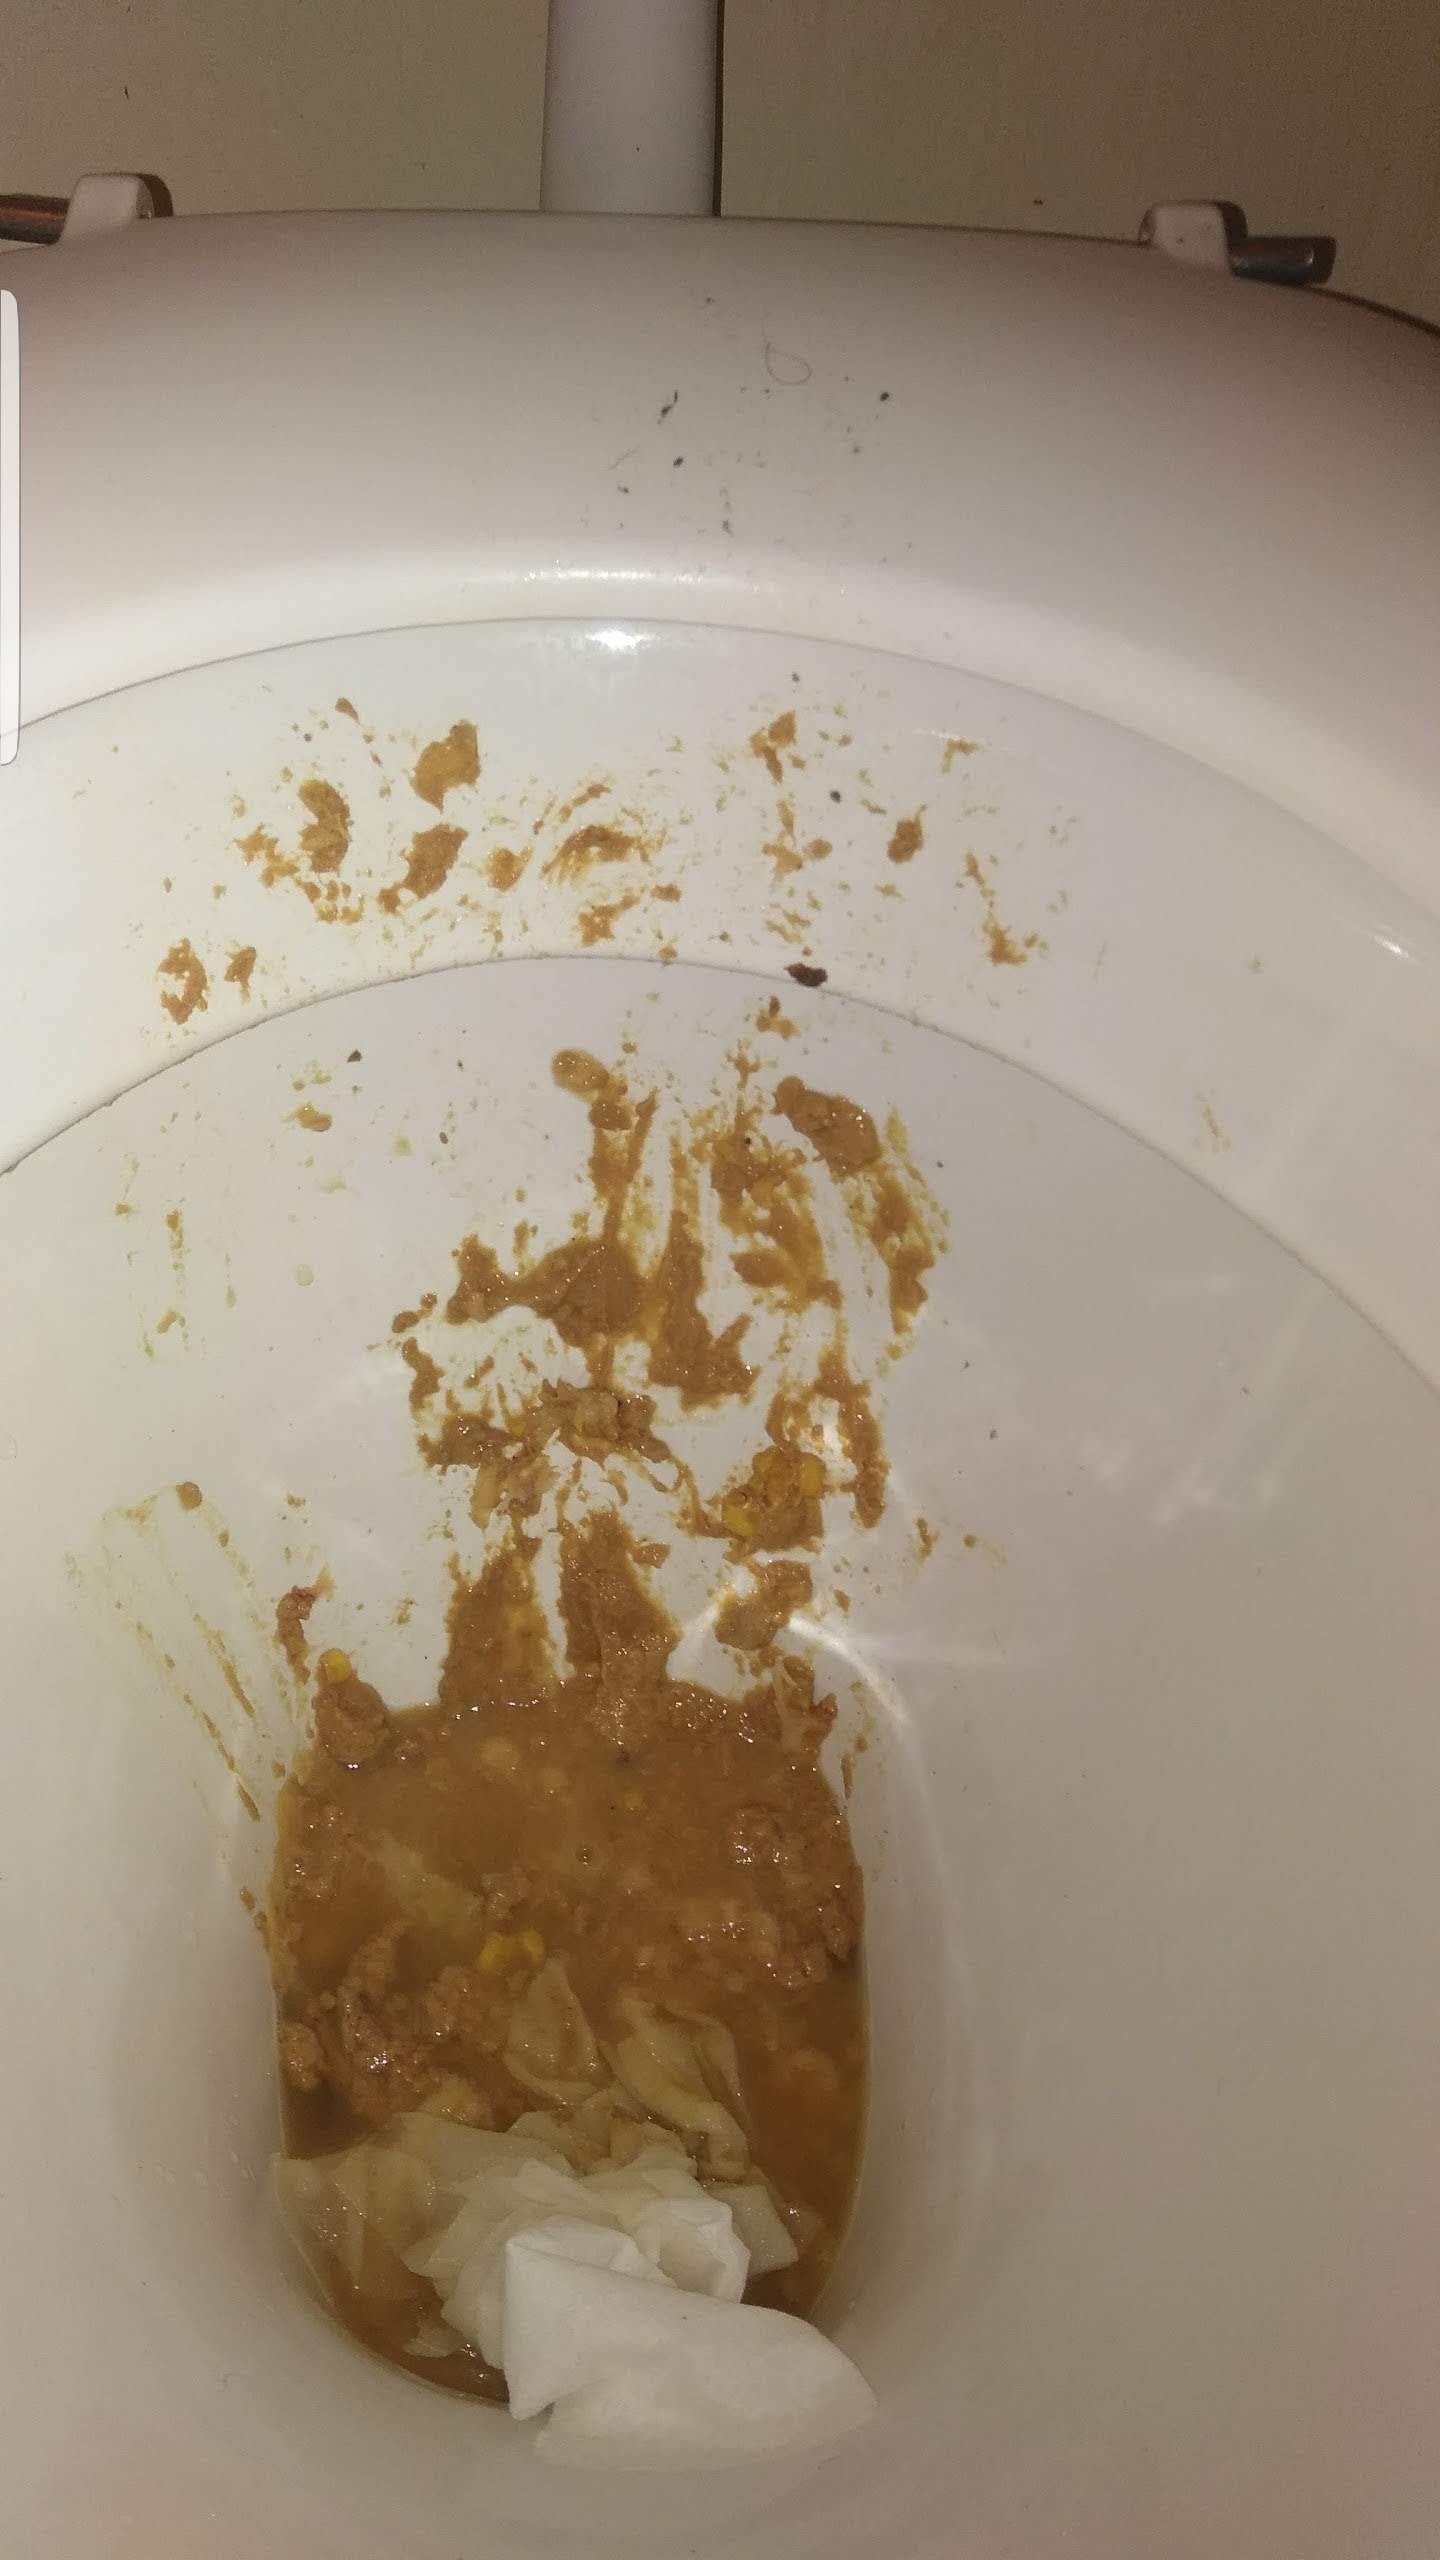 Farty diarrhea on my mates loo after work this afternoon